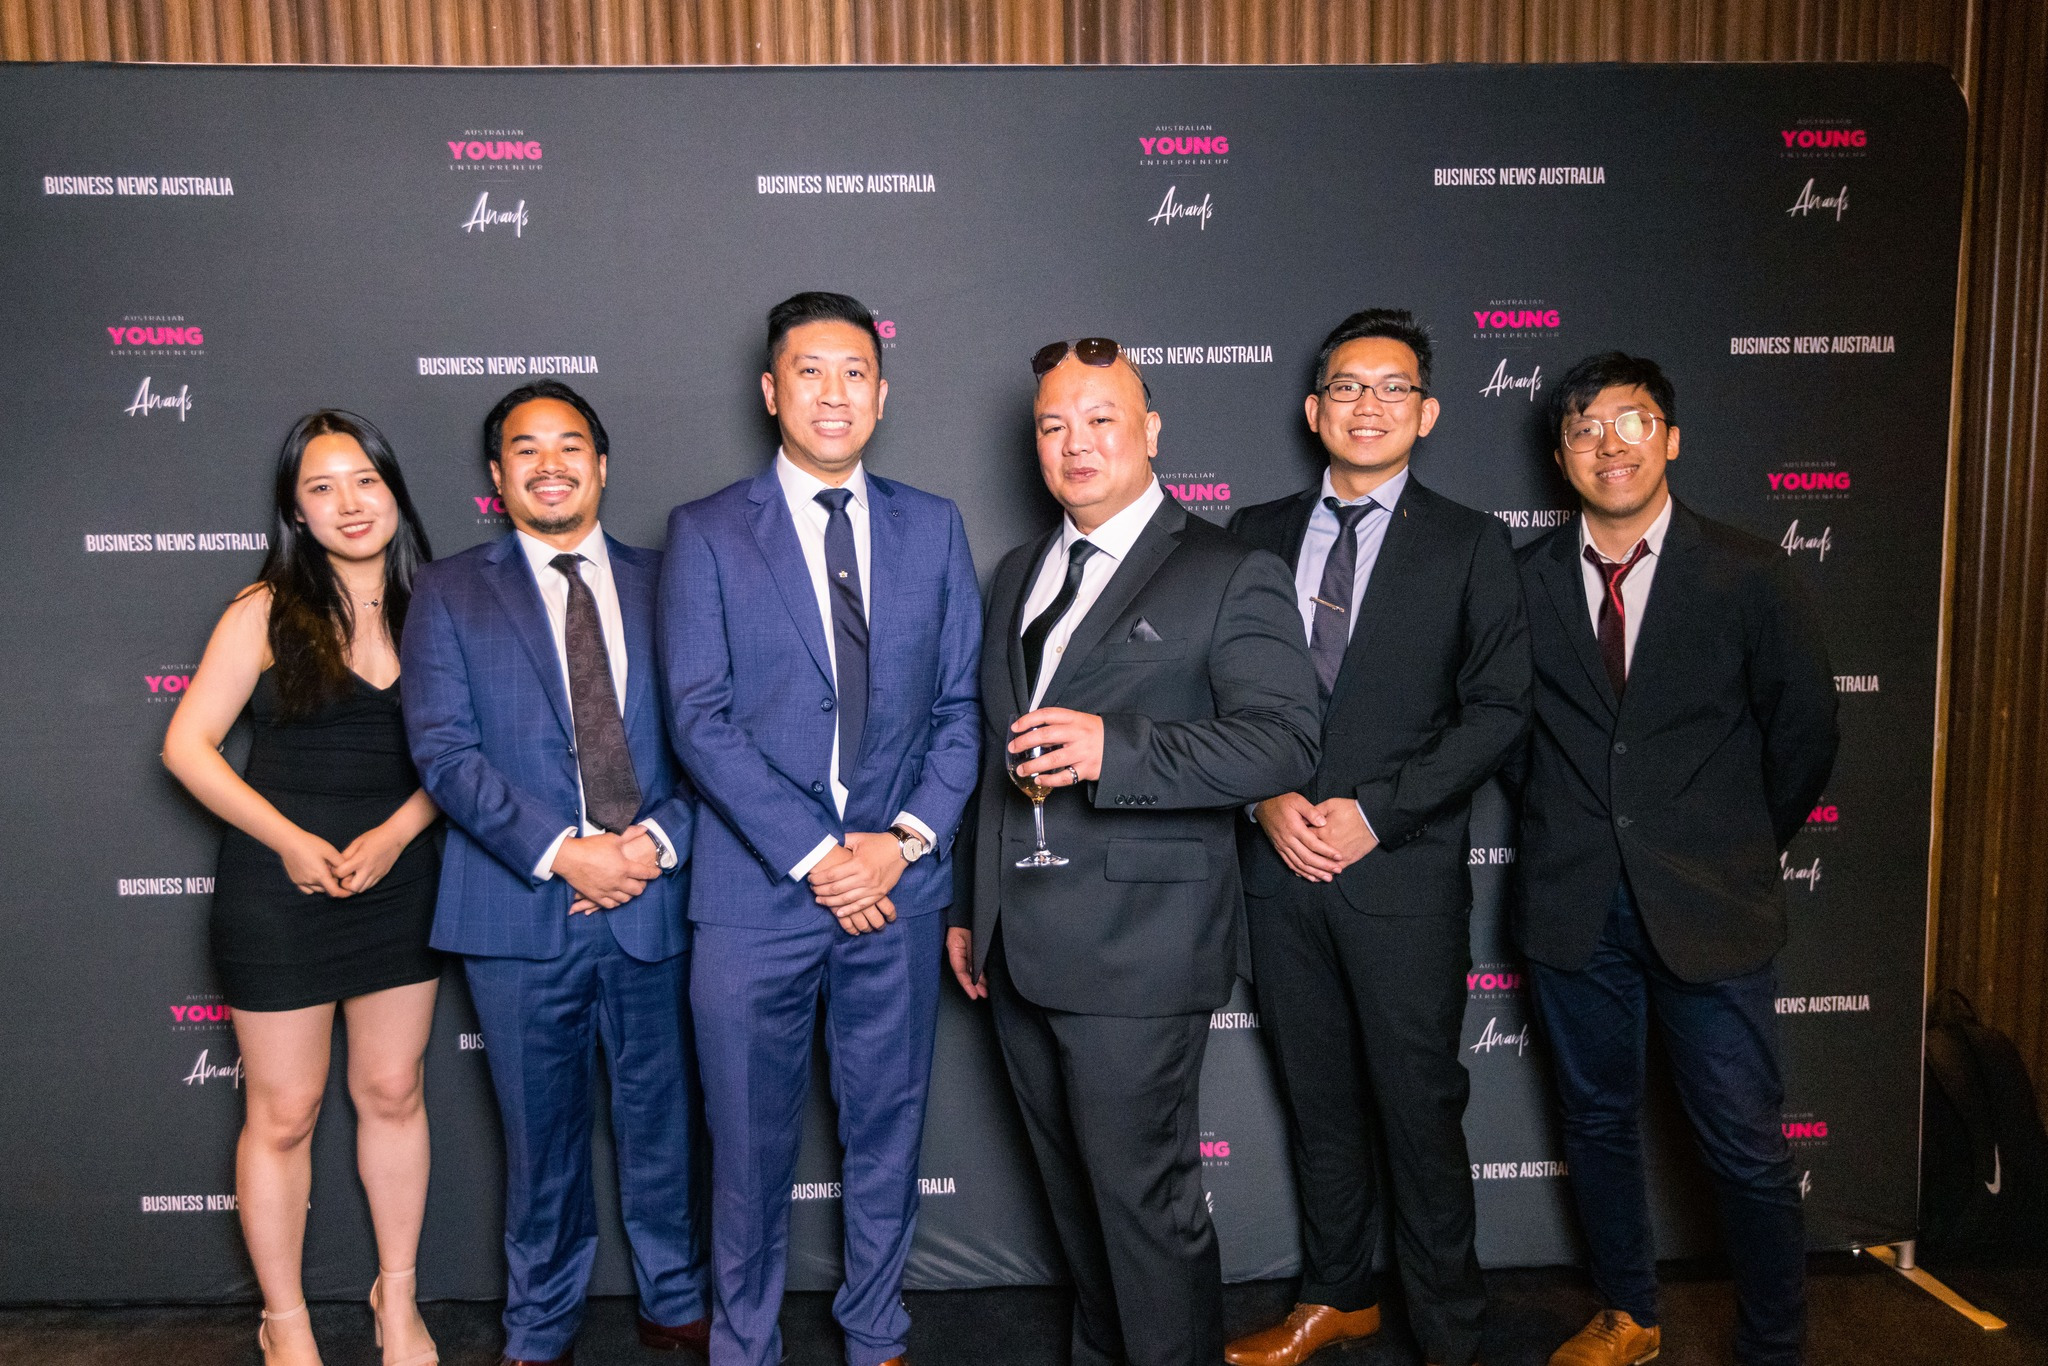 Finalists for Sydney’s Young Entrepreneur Awards – Marketing